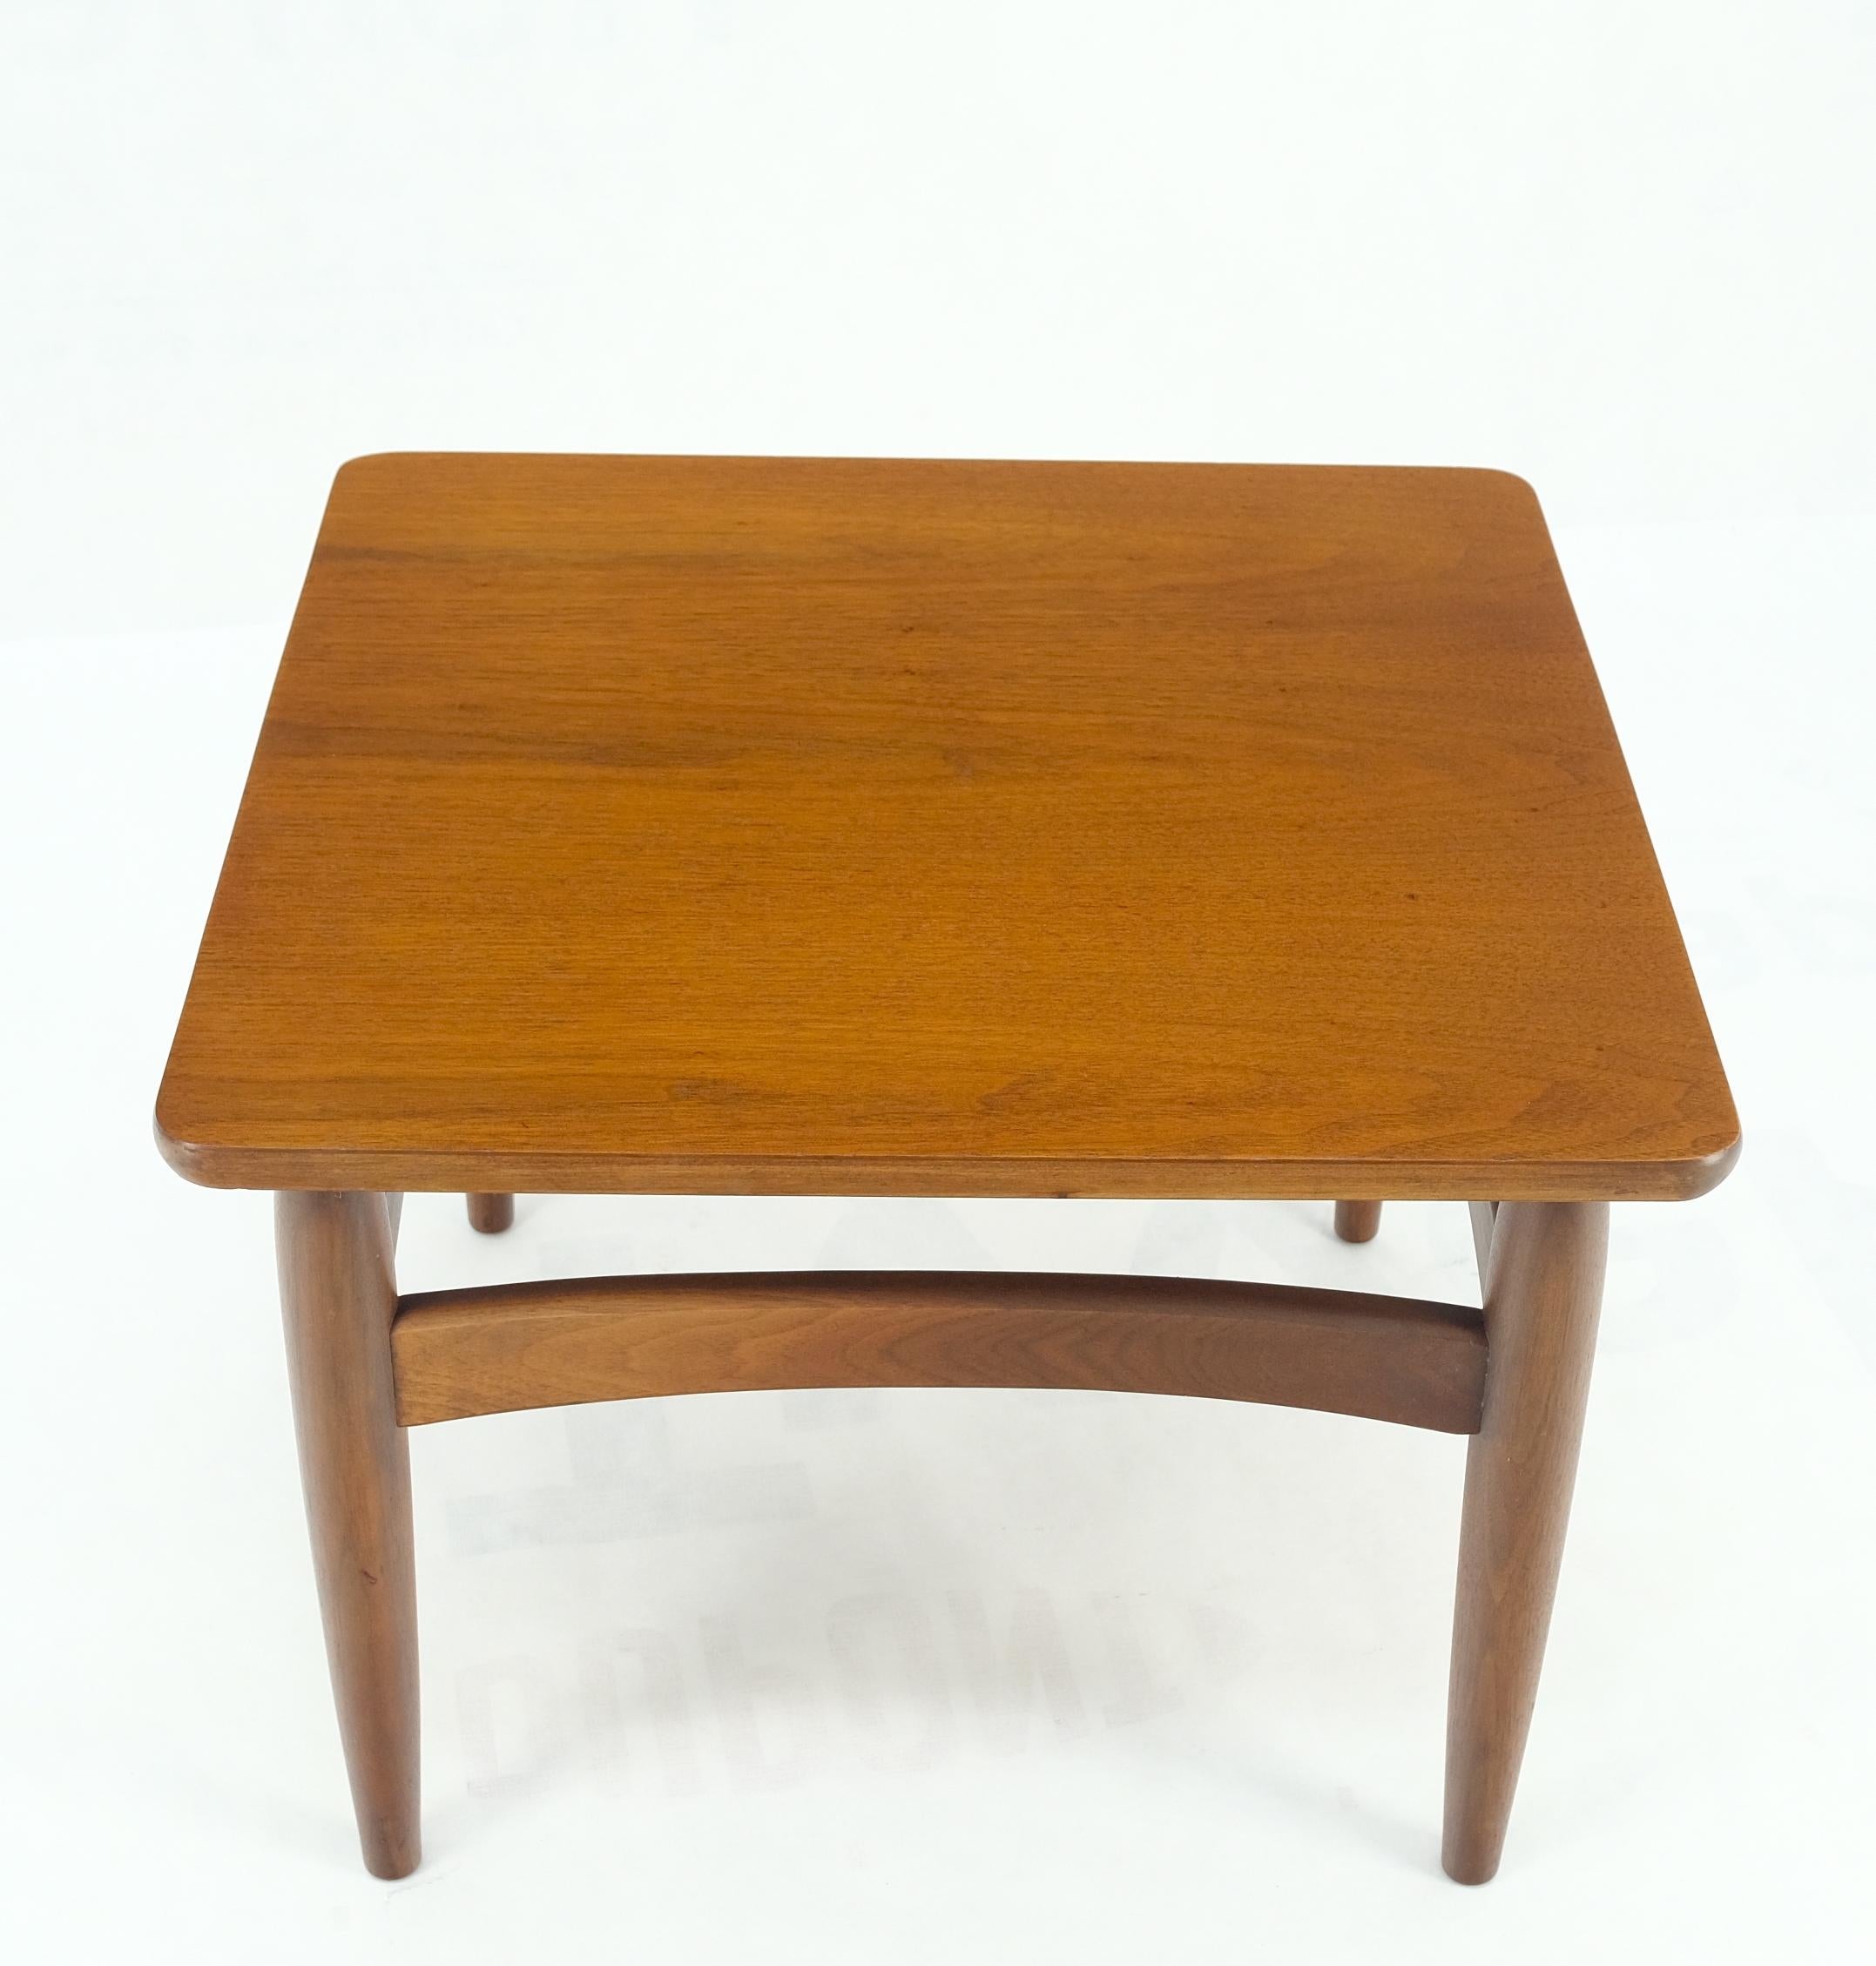 20th Century Square Mid-Century Modern Walnut Dowel Leg Side Coffee Occasional Table Mint! For Sale